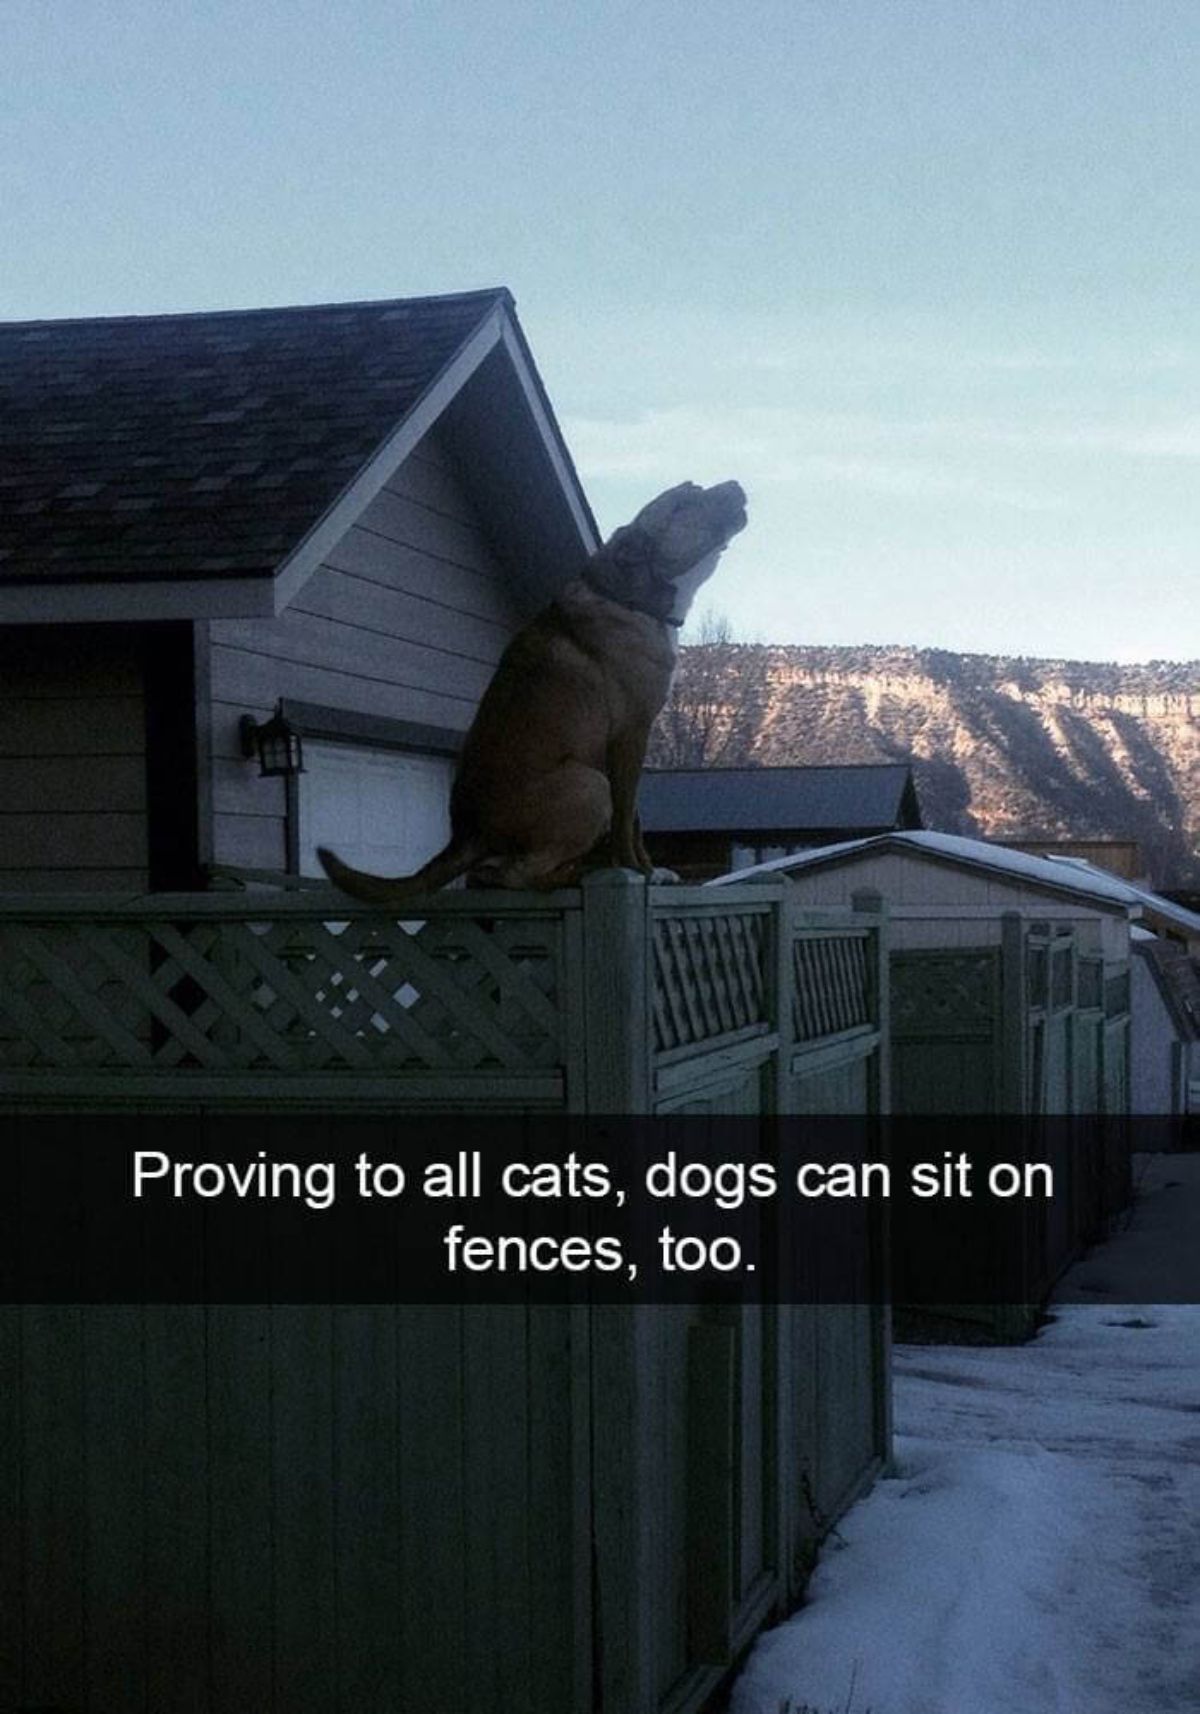 brown and white dog sitting on a fence and howling with a caption saying proving to all cats, dogs can sit on fences, too